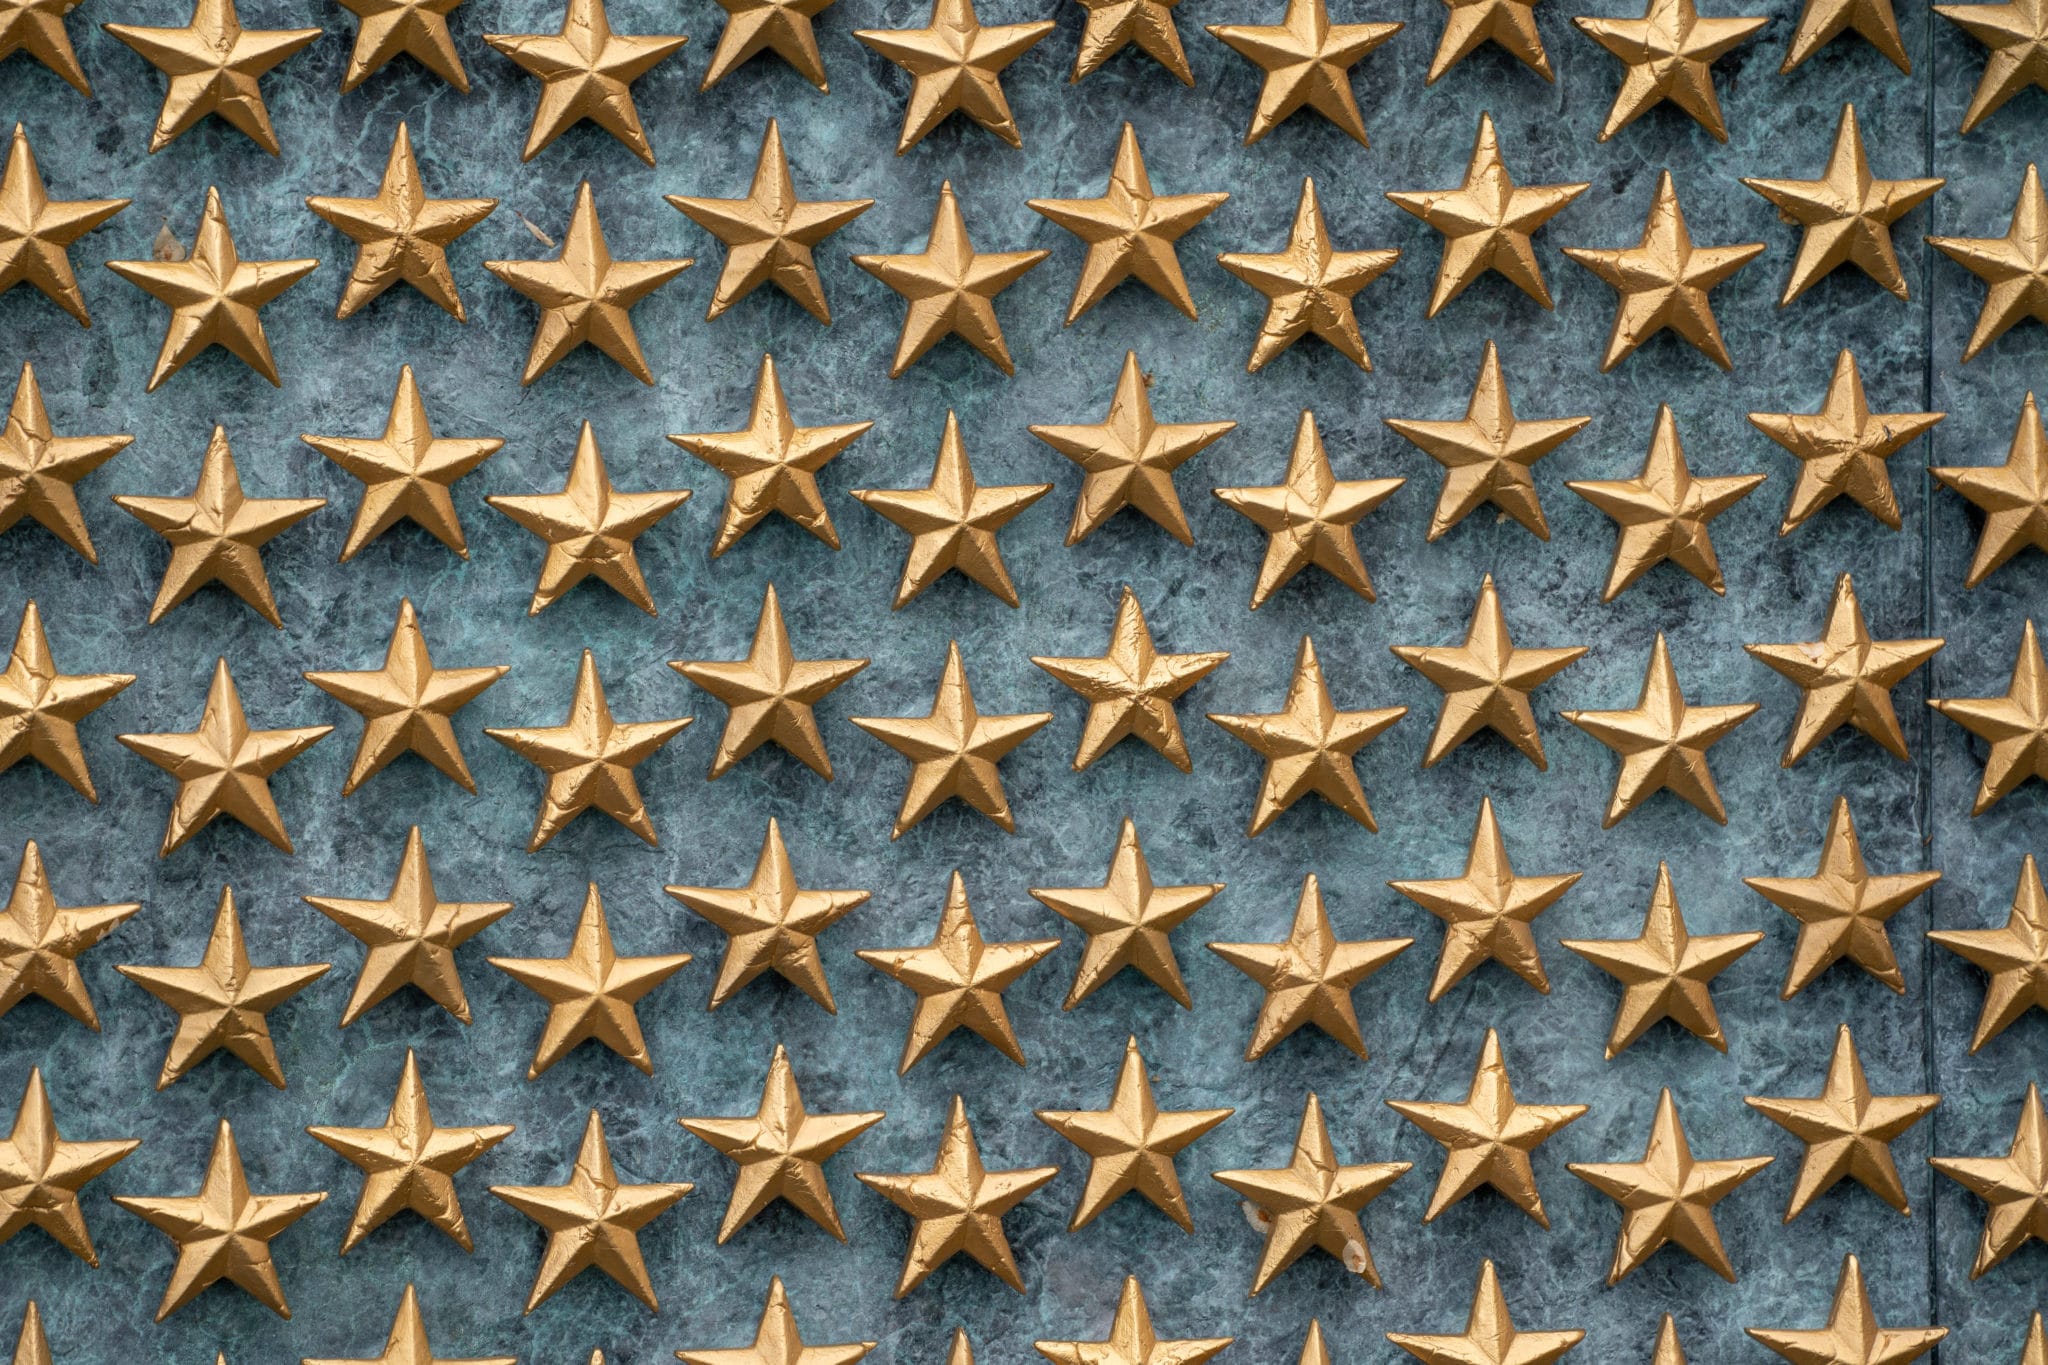 Stars of freedom on the wall at the World War II Memorial in Washington DC